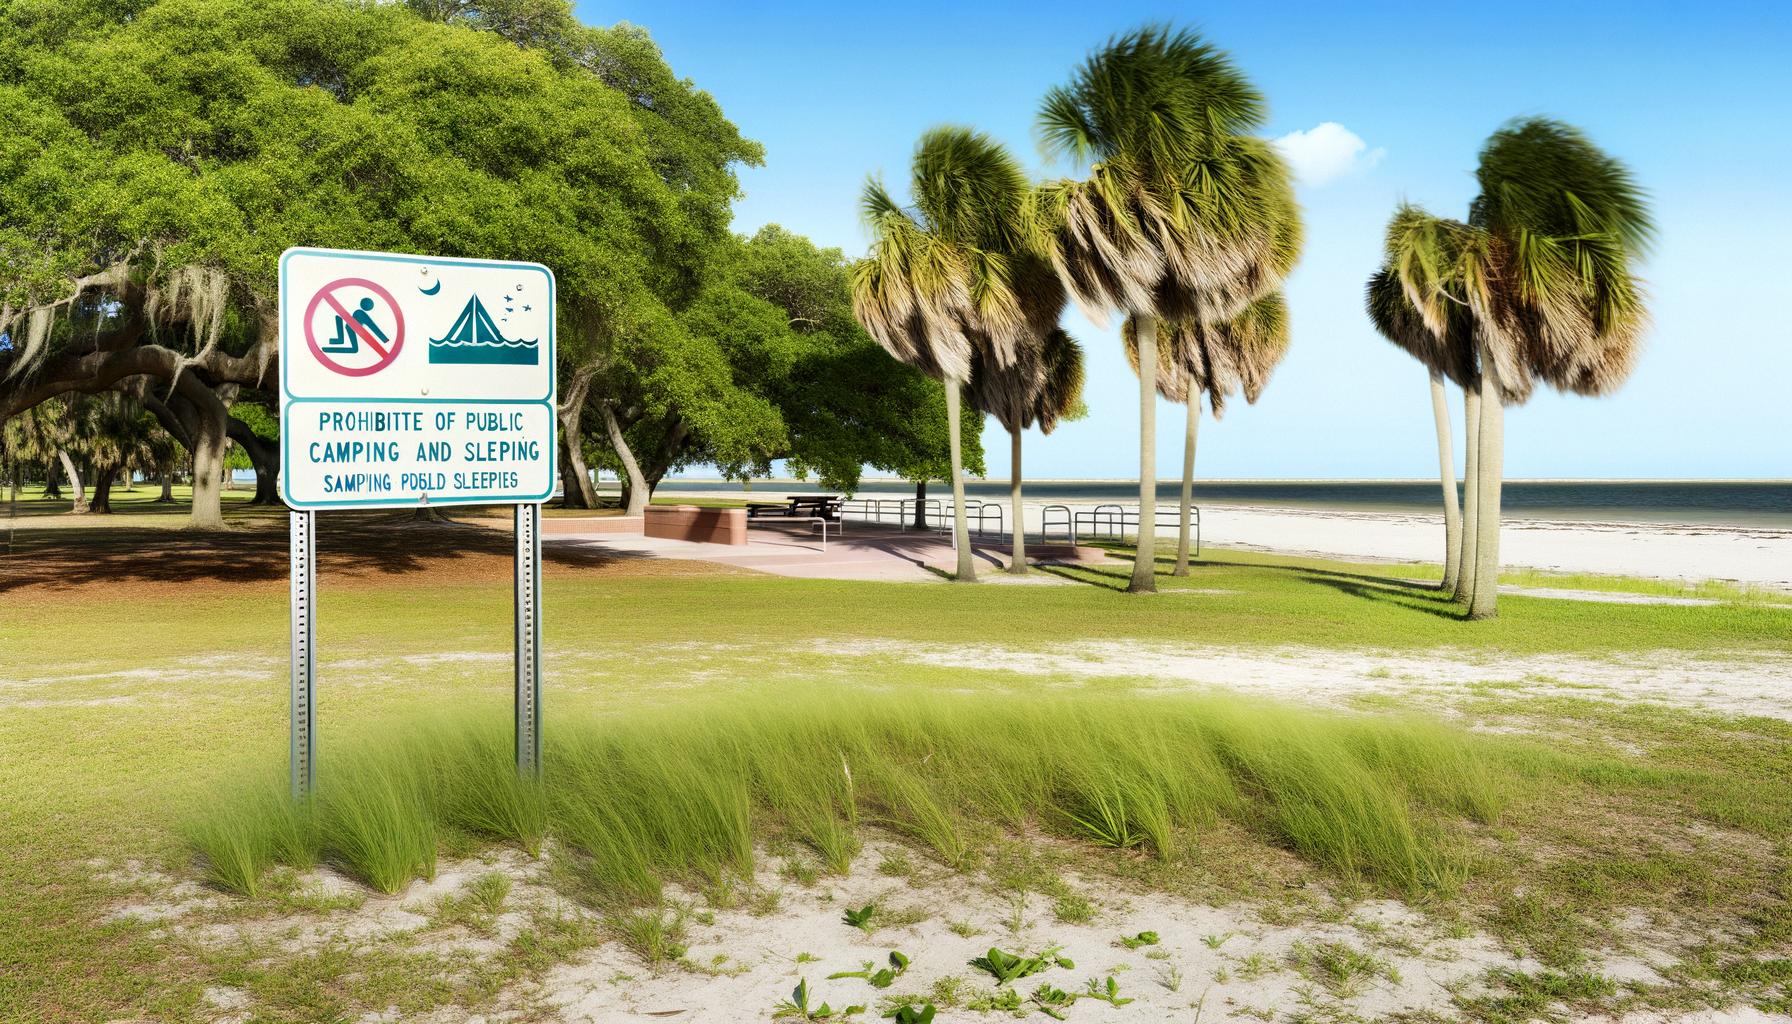 Florida's public camping ban includes provisions for designated areas for the homeless.